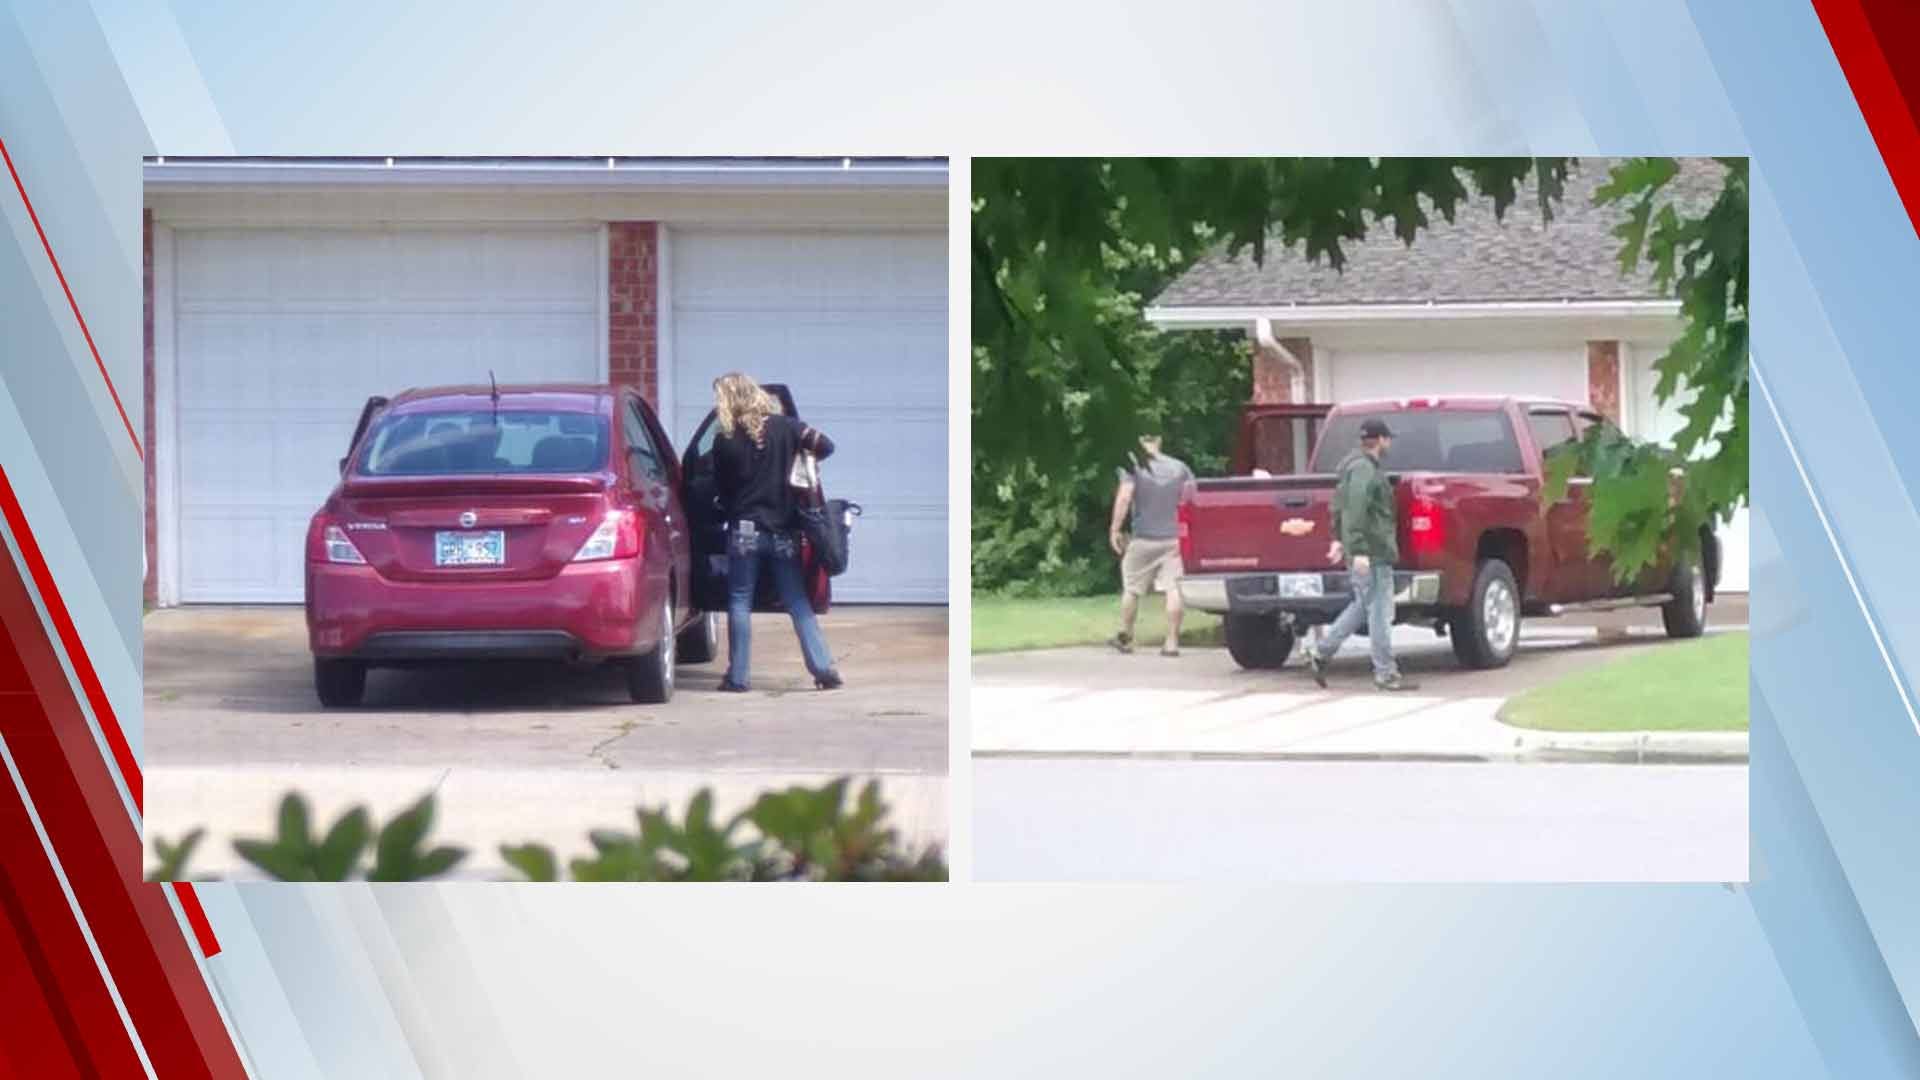 Tulsa Police Want To Speak To Persons Of Interest In House Burglary